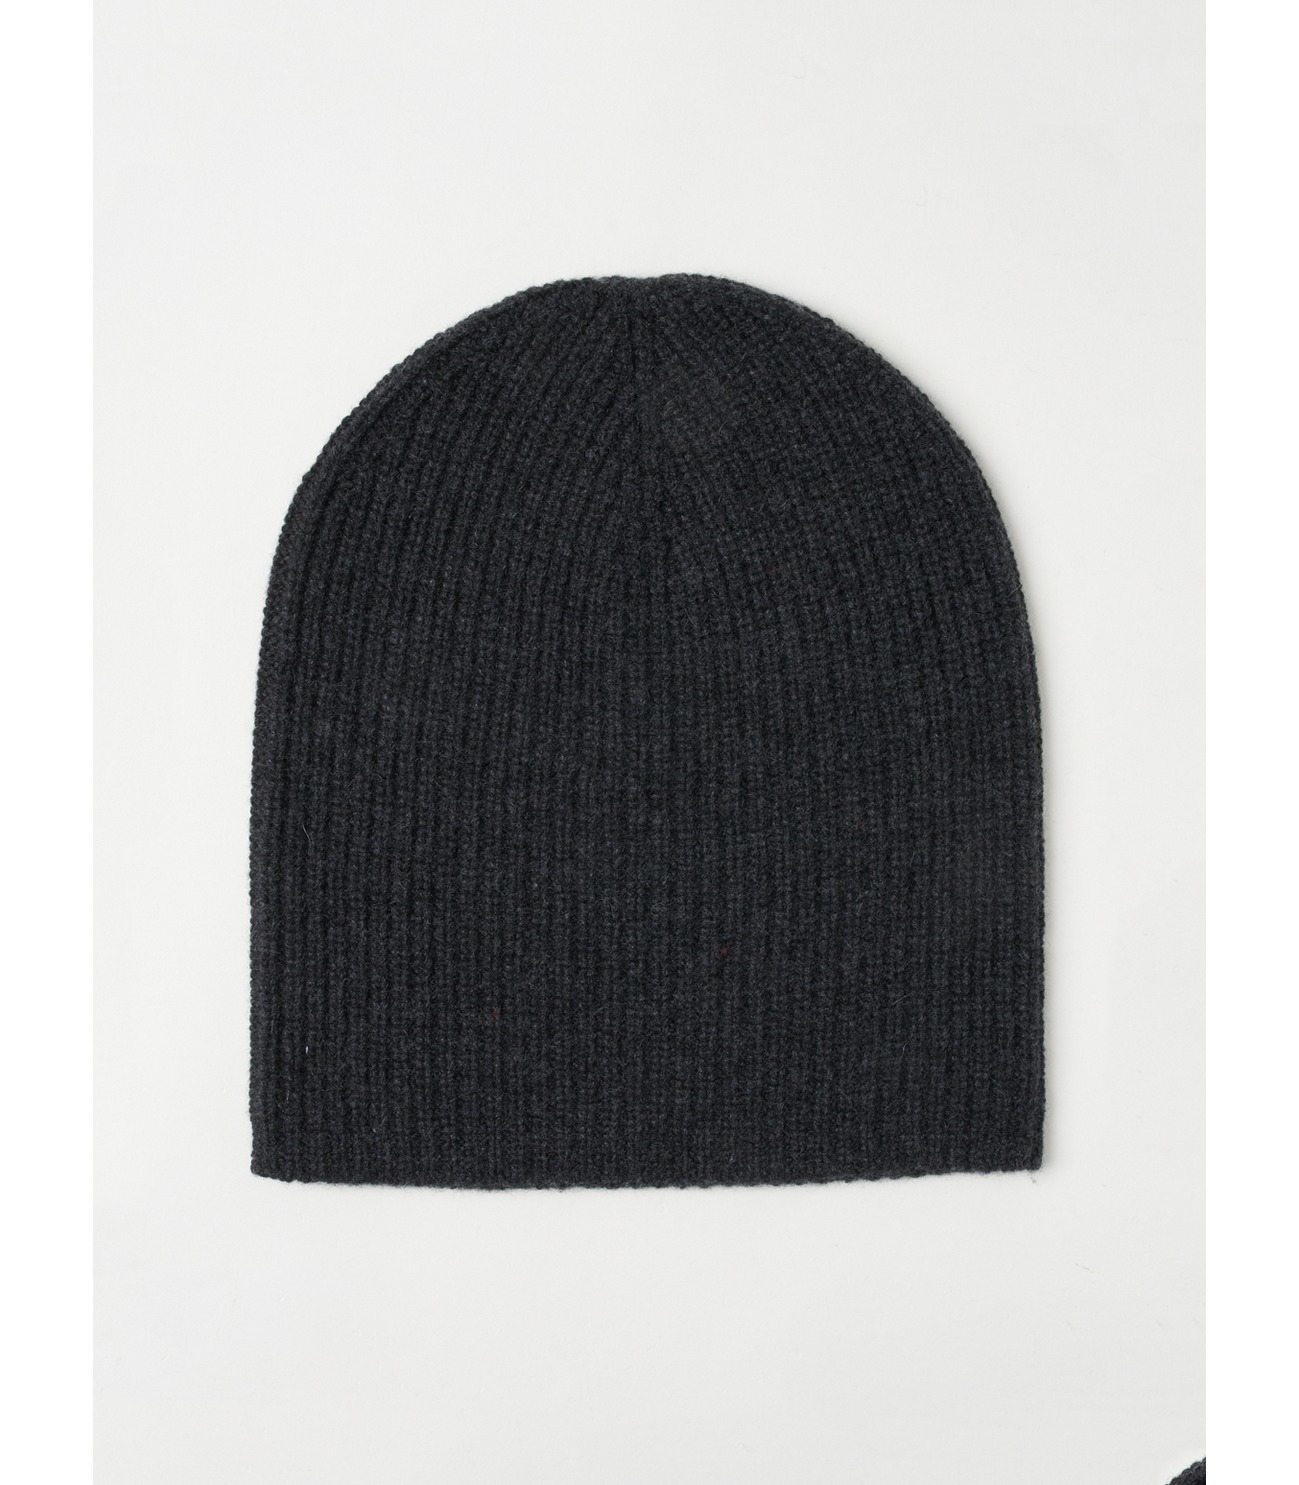 Holiday cashmere cap 詳細画像 charcoal 2